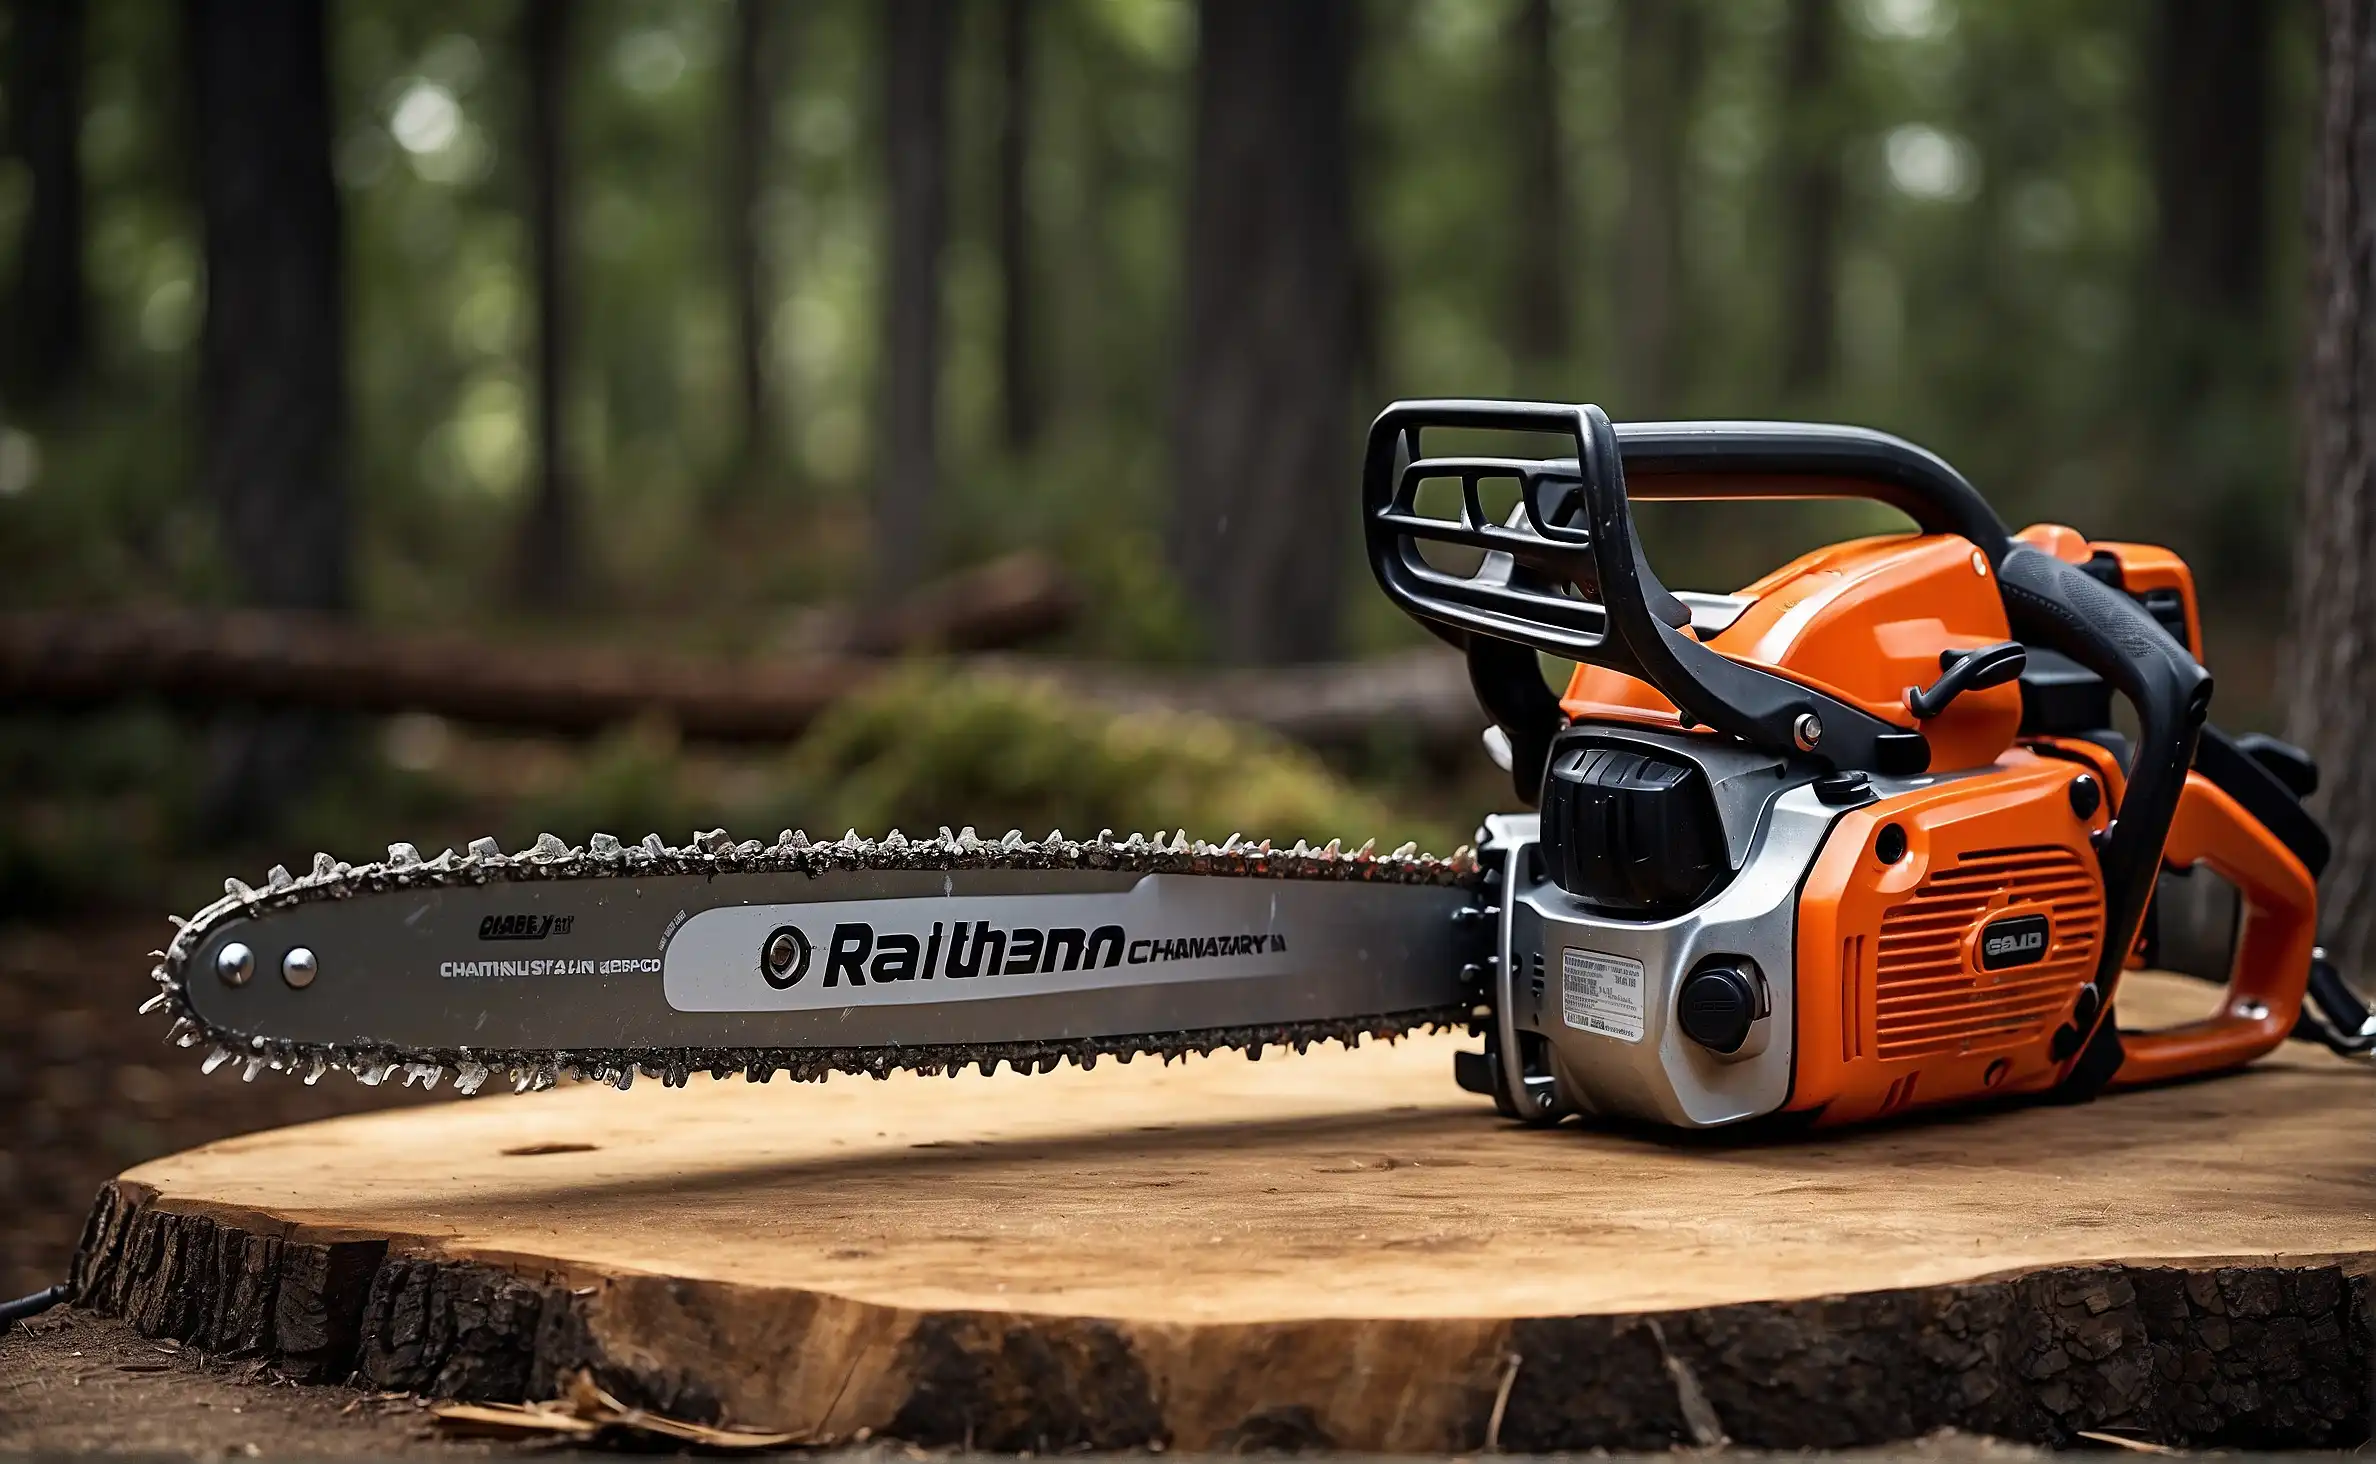 How Big of a Chainsaw Do I Need